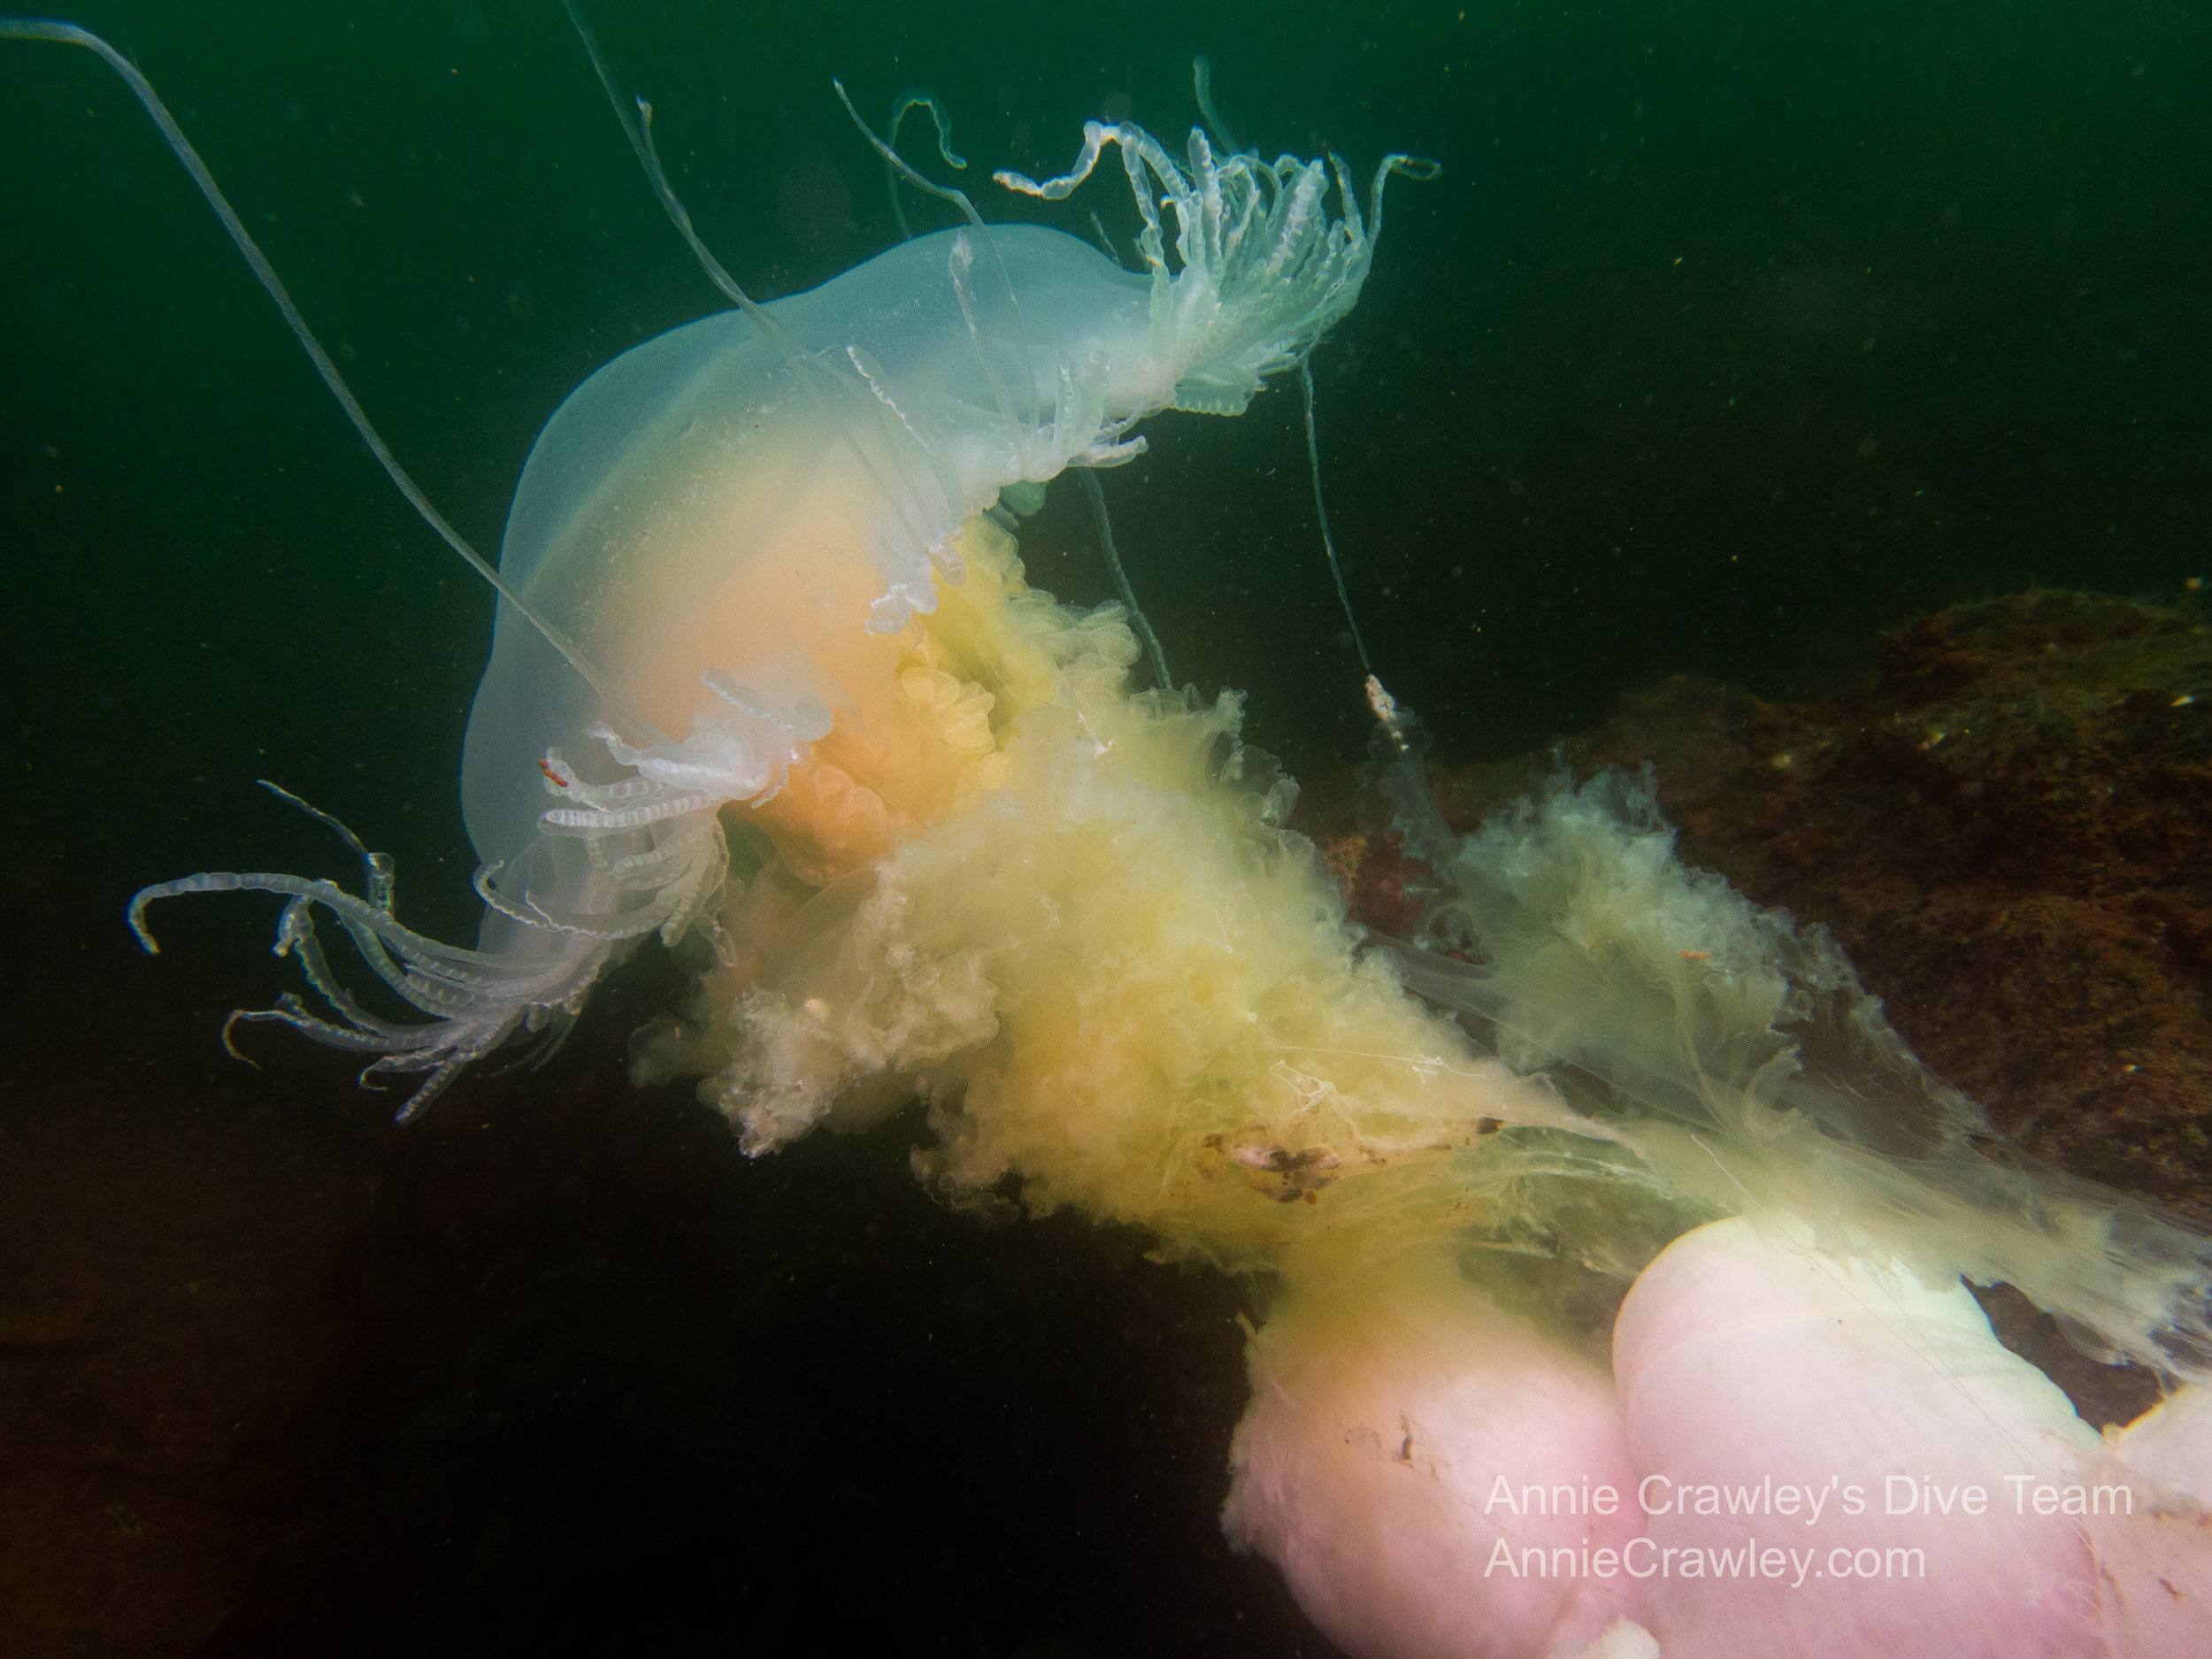 Egg yolk jelly with crustacean symbionts